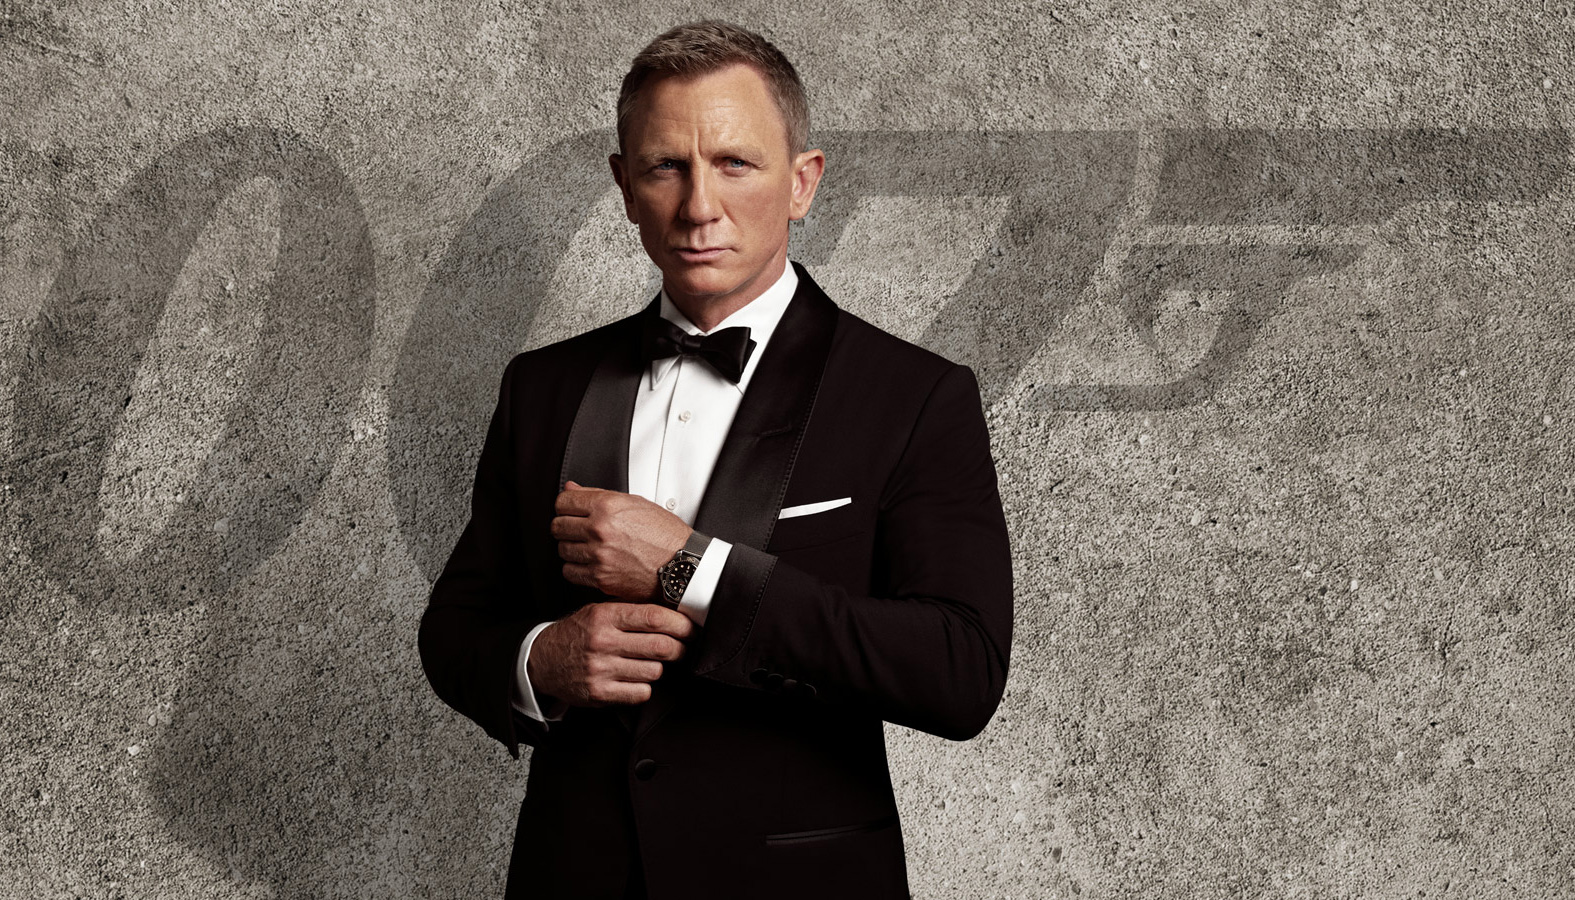 James Bond movie &#39;No Time To Die&#39; slated to have world&#39;s largest premier